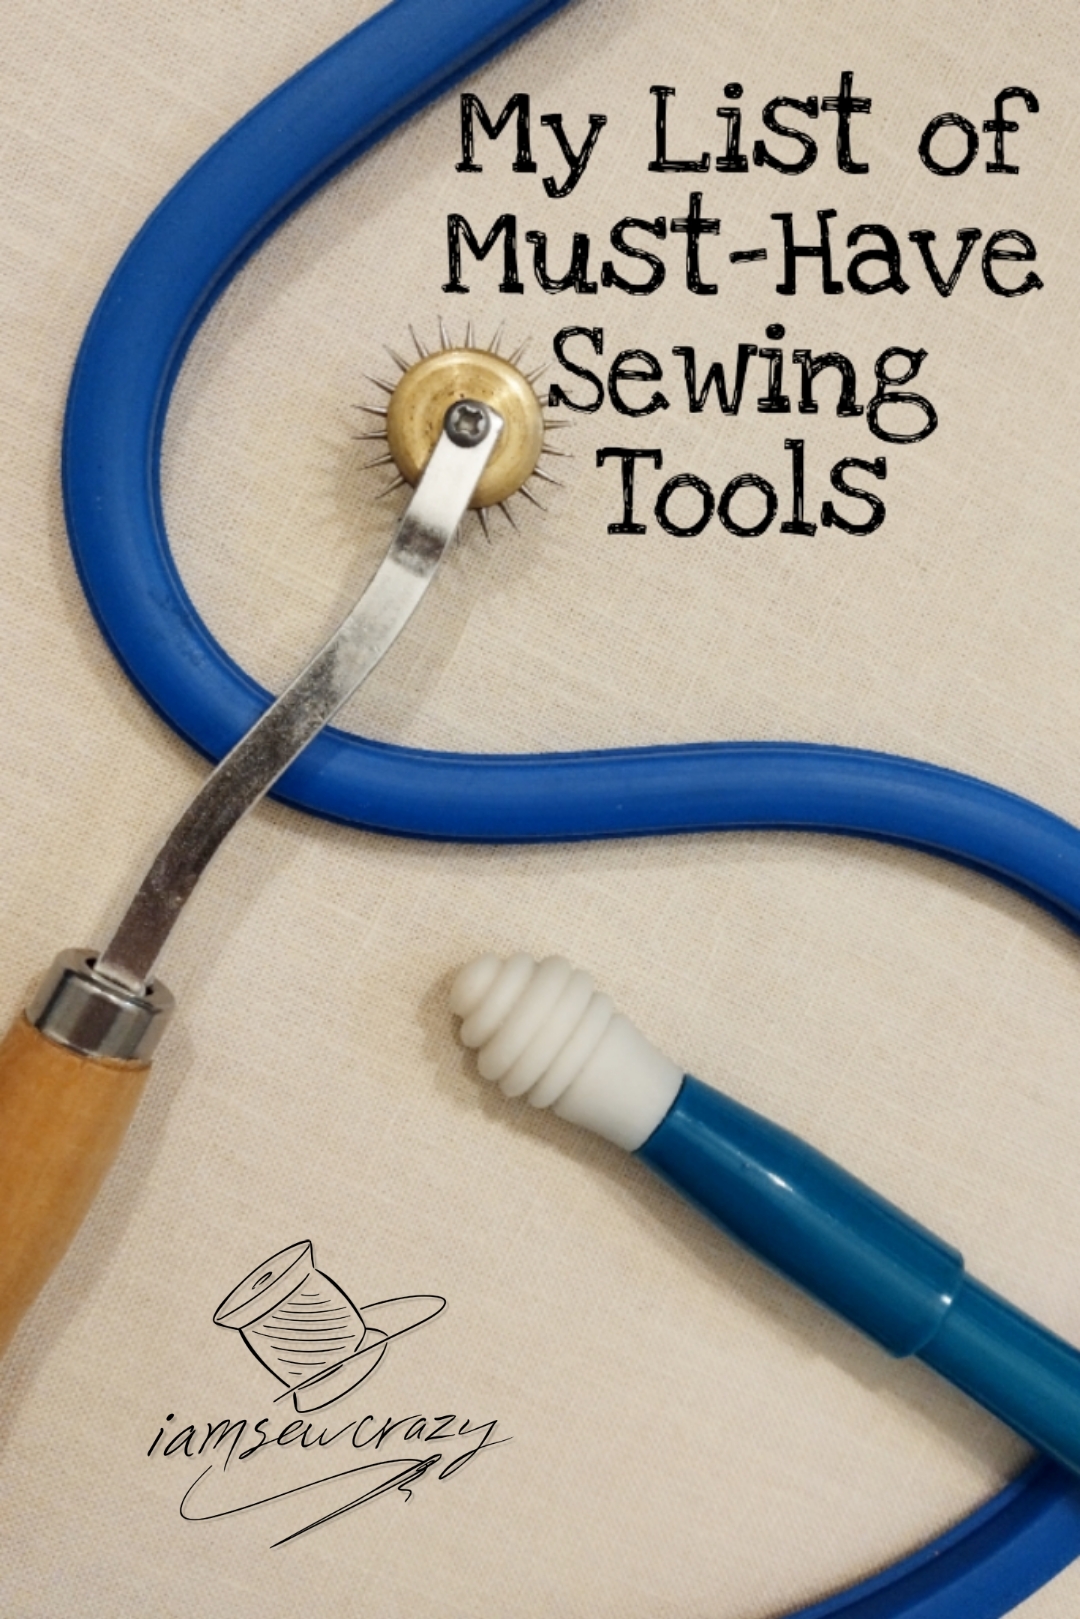 flexicurve, needlepoint tracing wheel, and seam ripper with text overlay: my list of must-have sewing tools